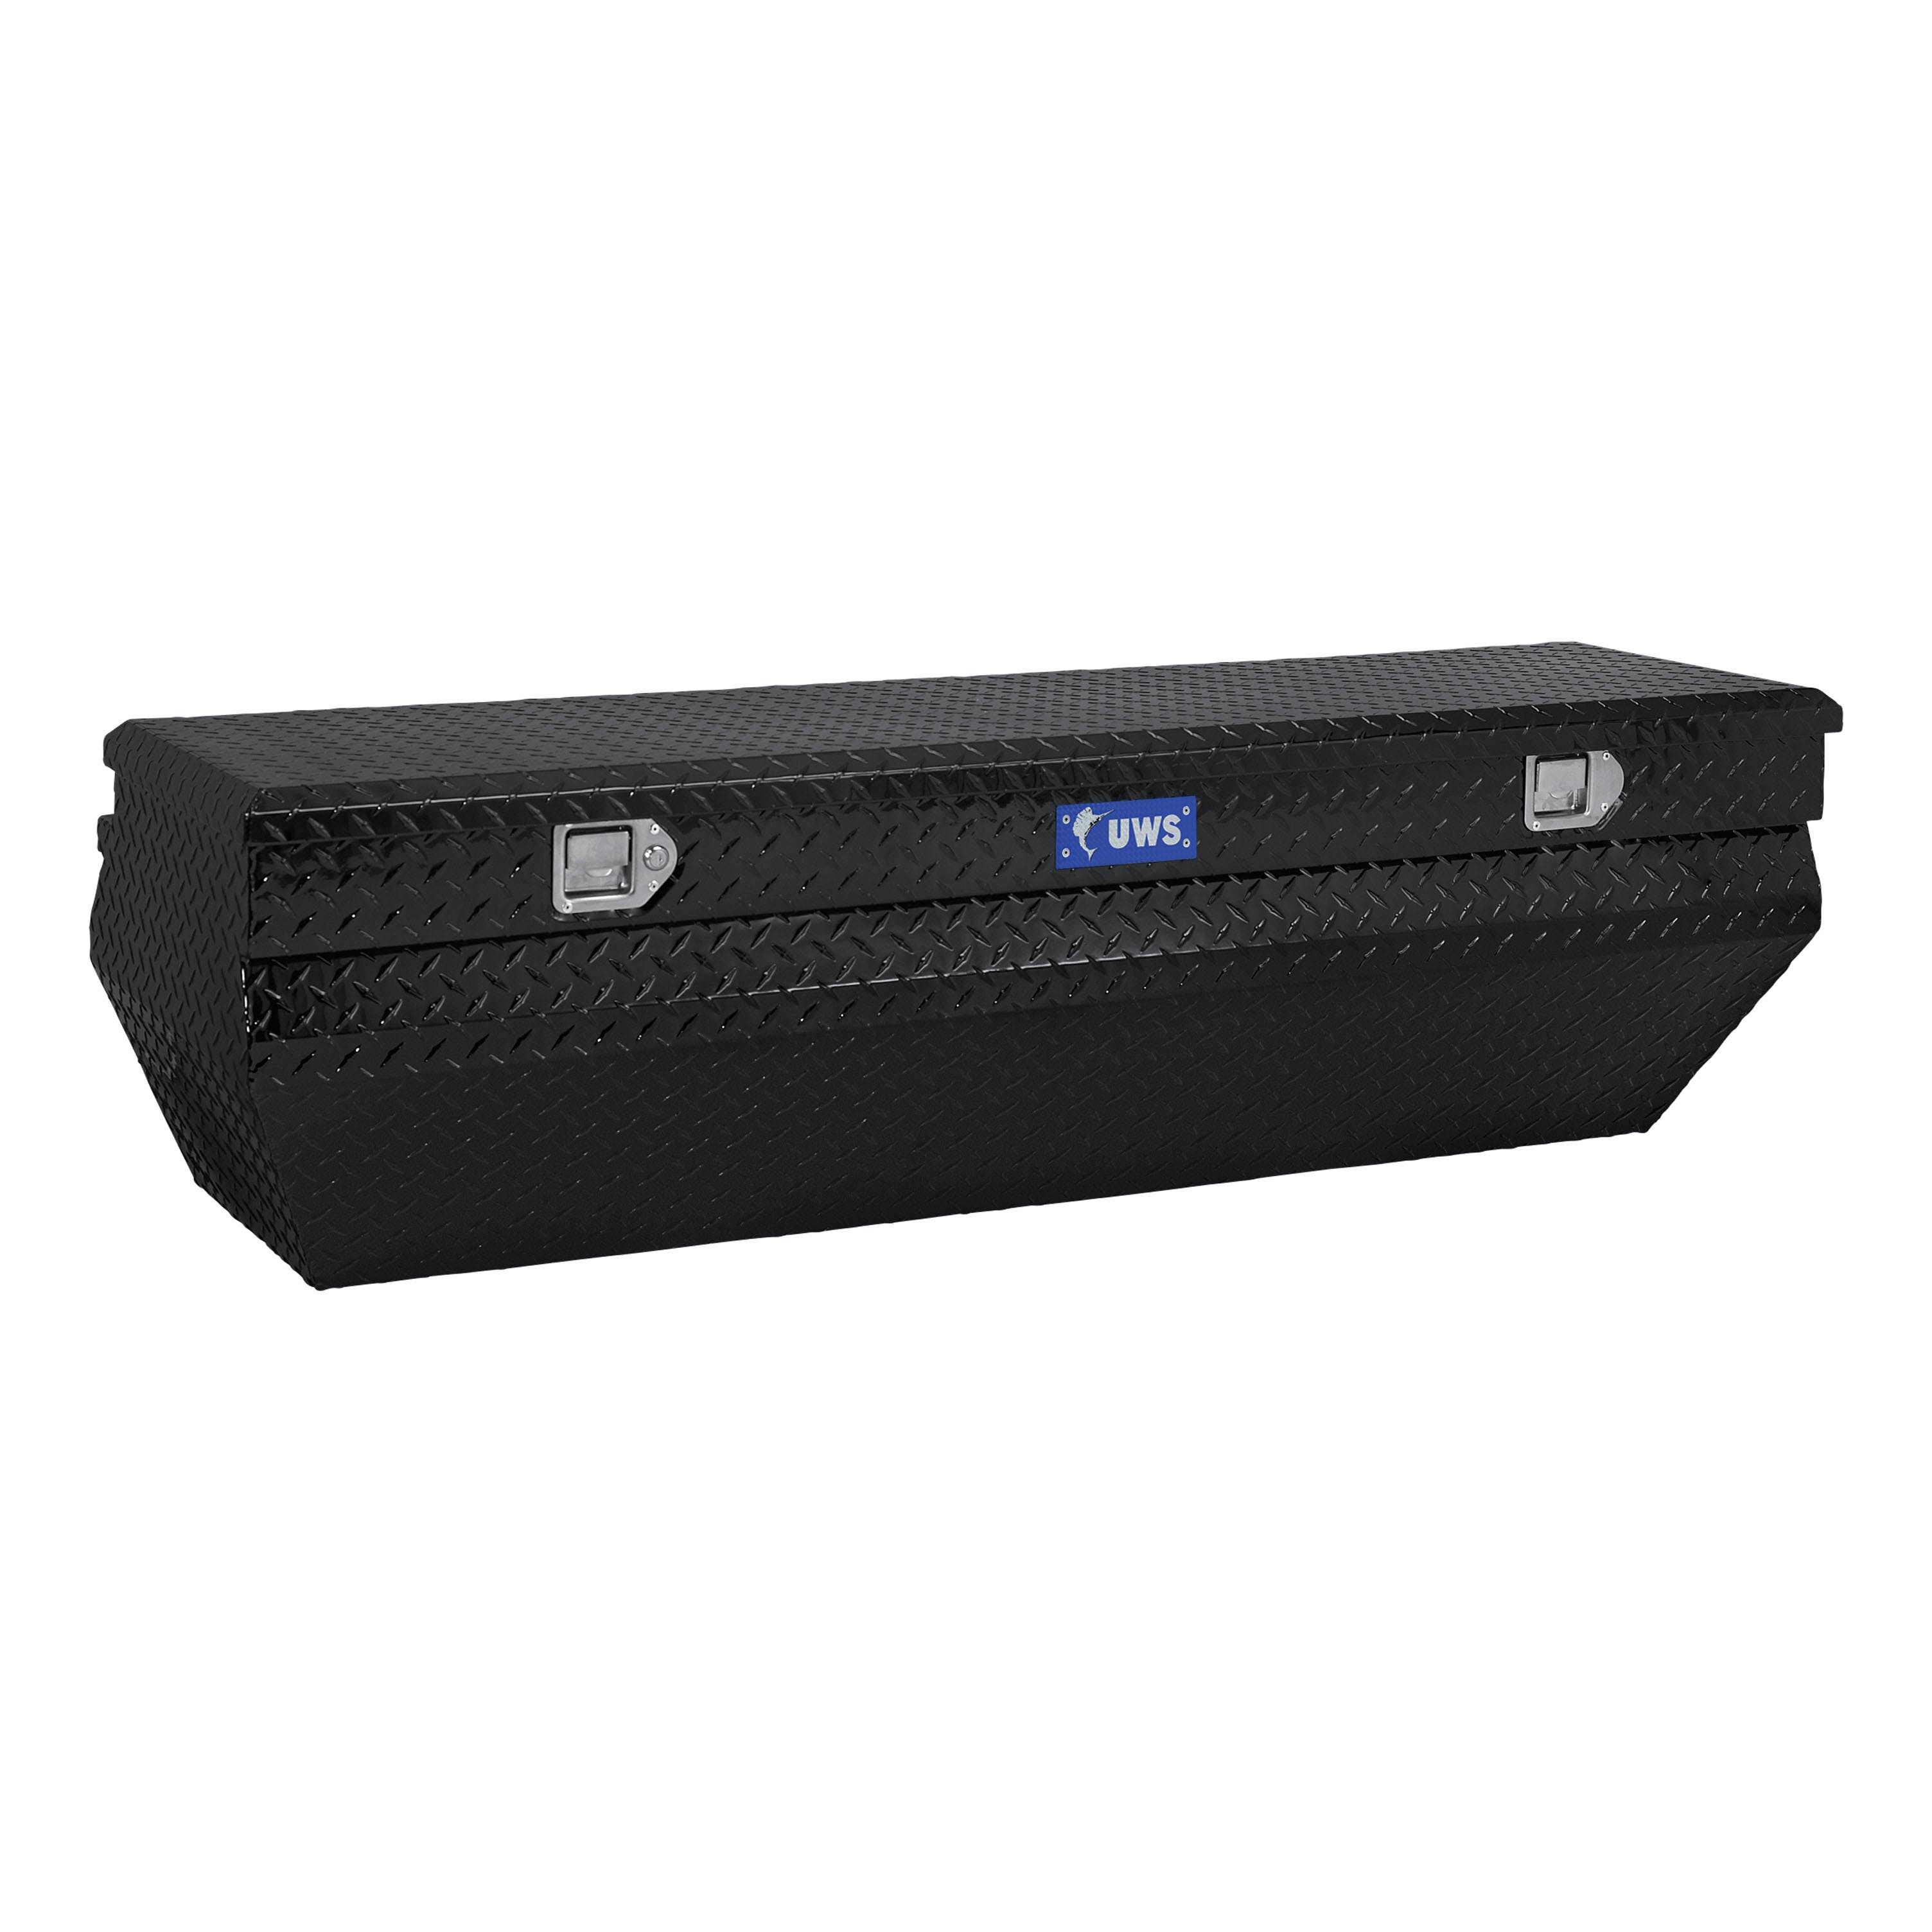 UWS TBC-55-WN-BLK 55 inch Aluminum Chest Box Wedge Notched Black